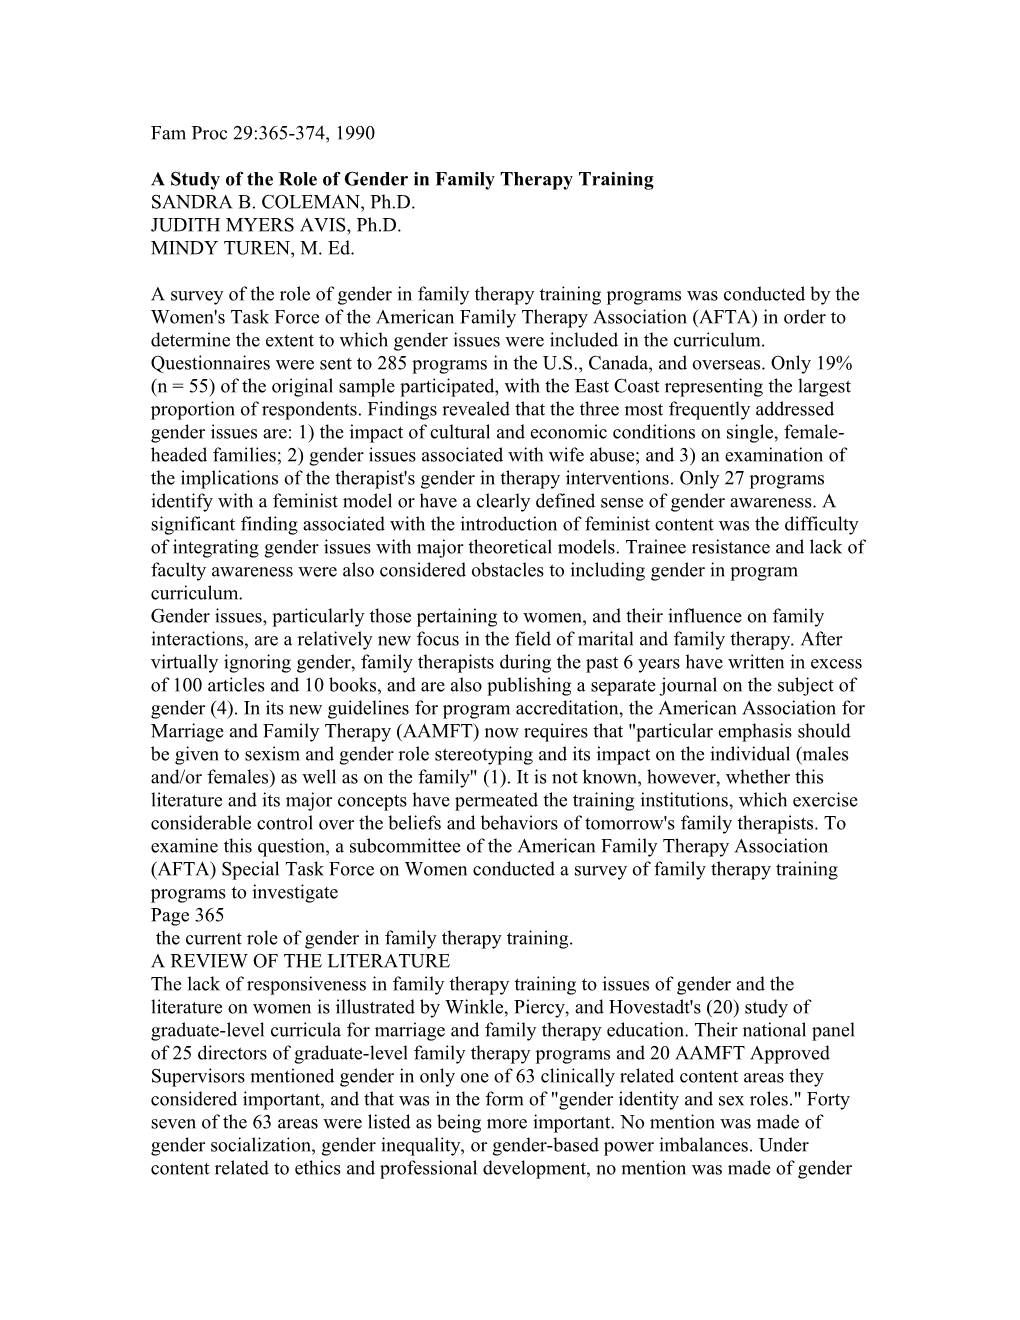 A Study of the Role of Gender in Family Therapy Training